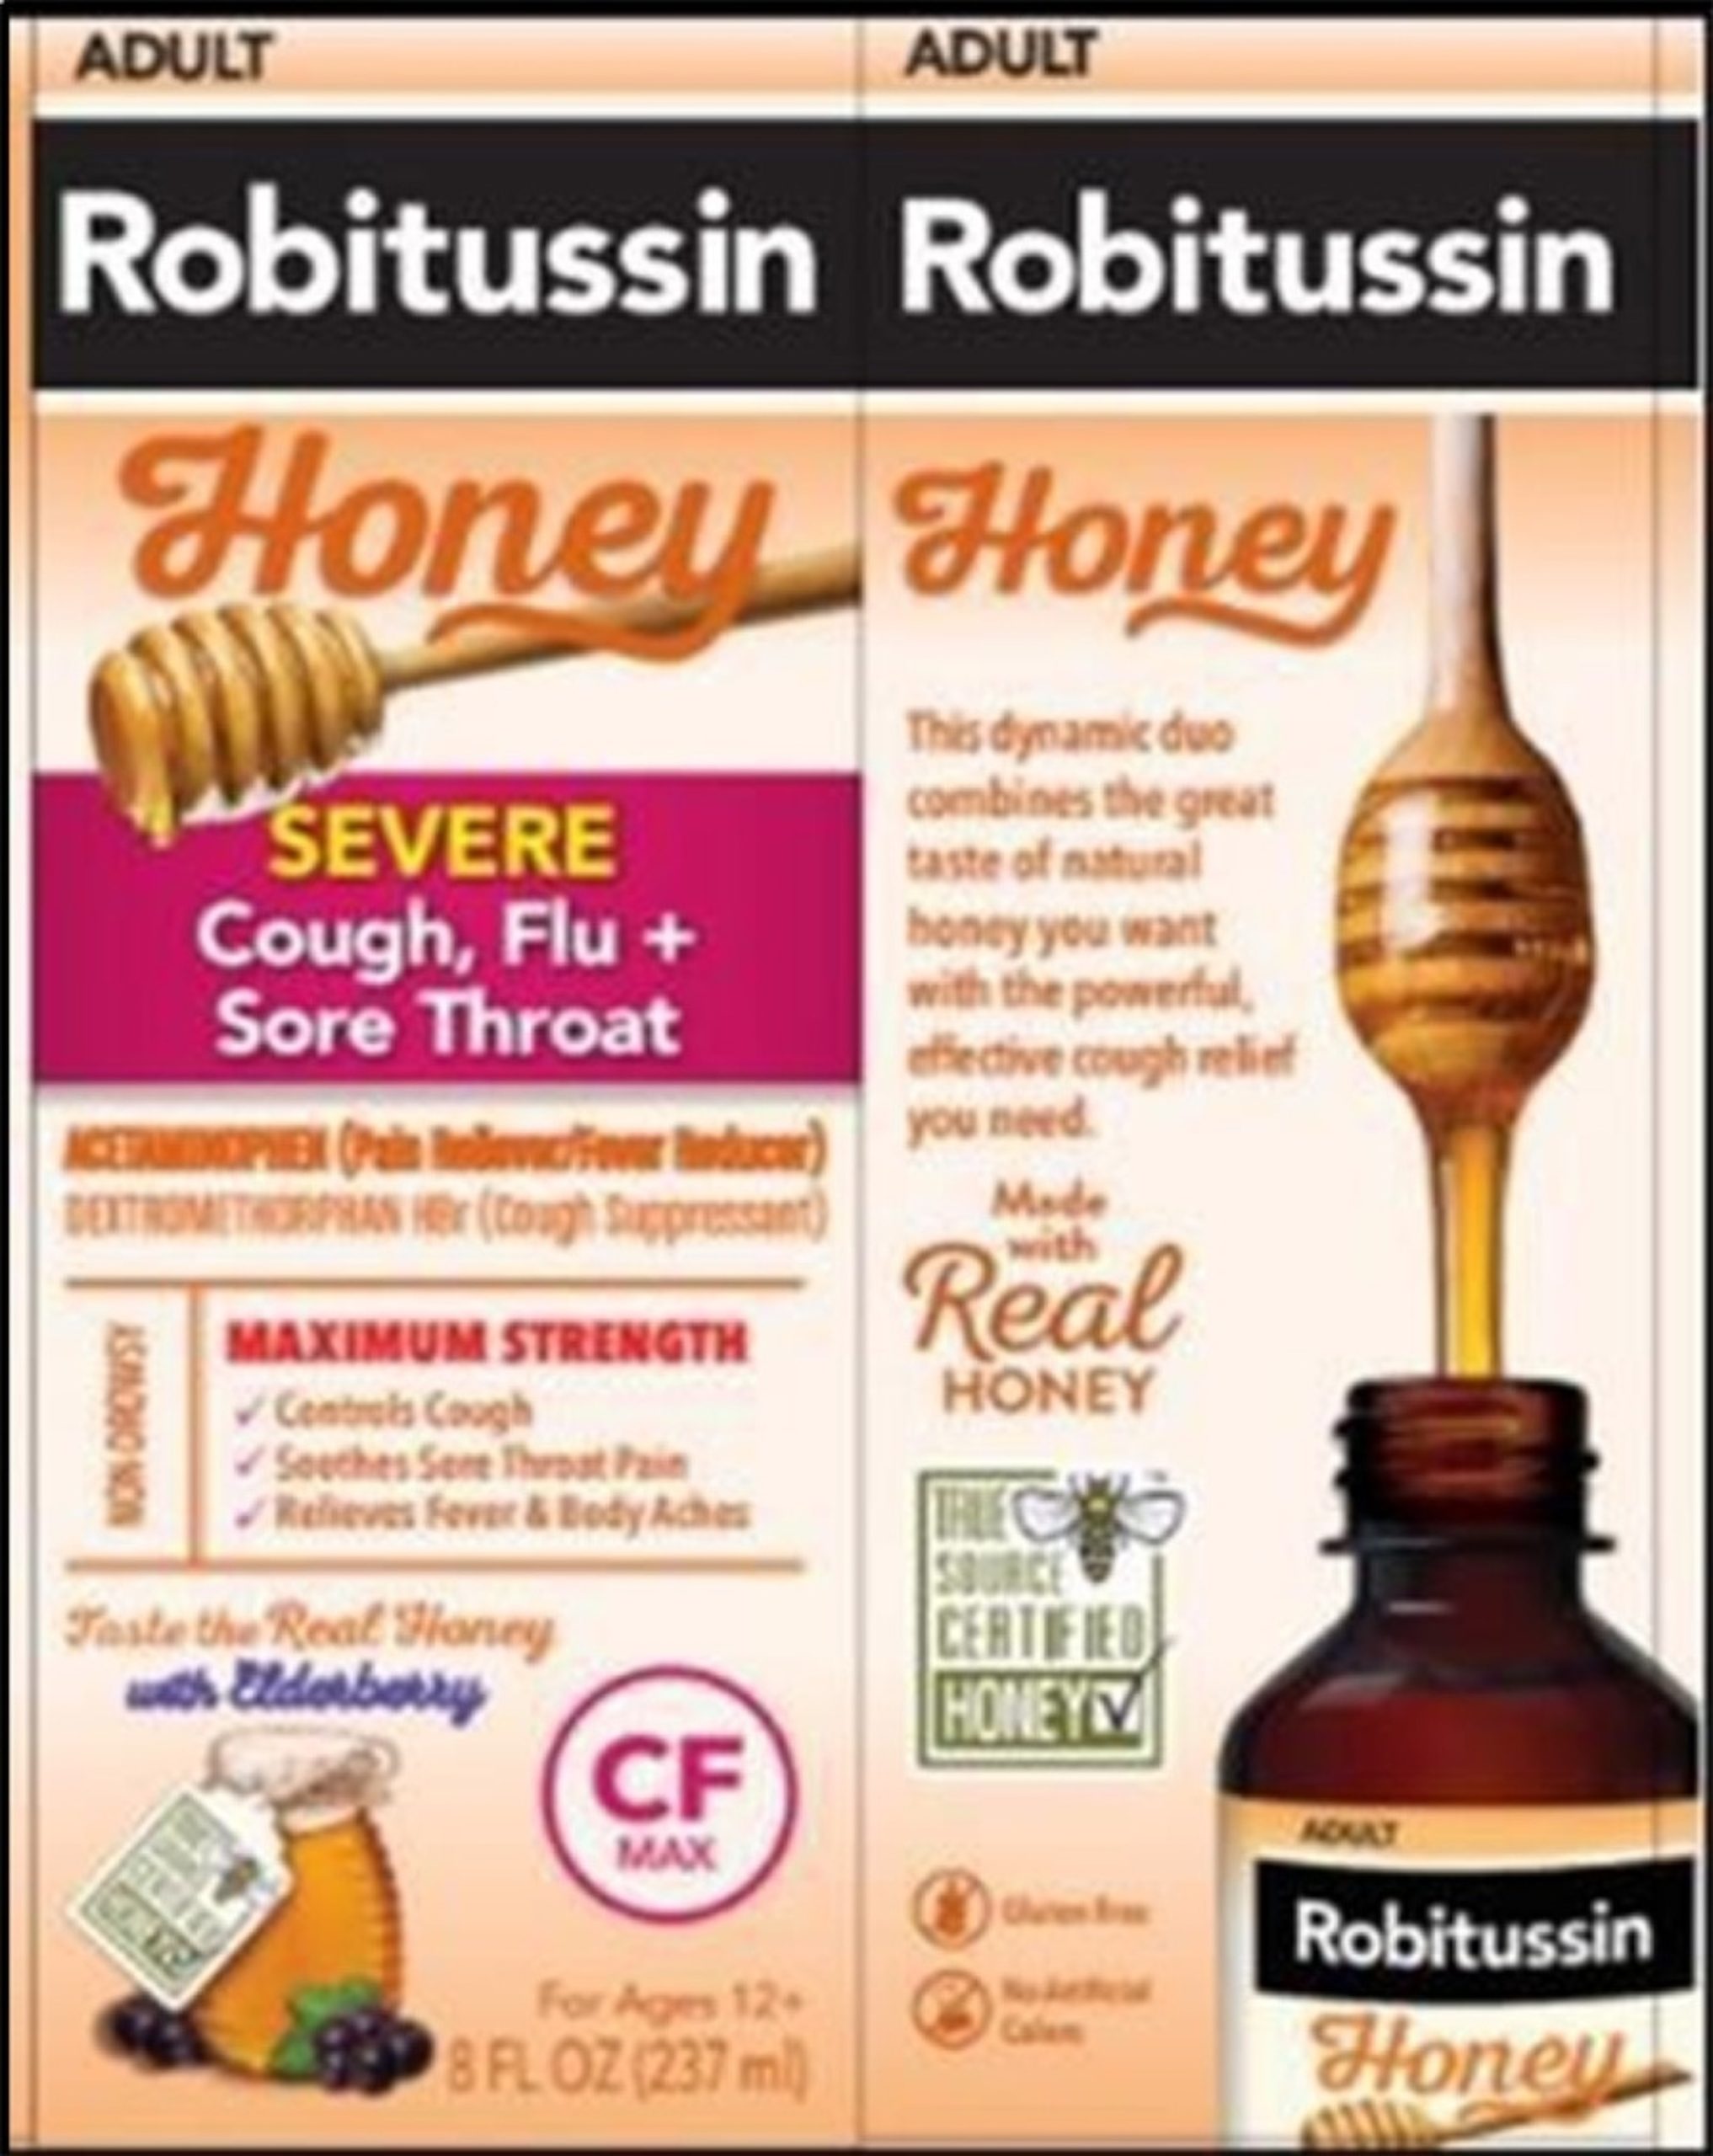 Recall Issued for Certain Robitussin Cold and Flu Cough Syrups Over Contamination Concerns